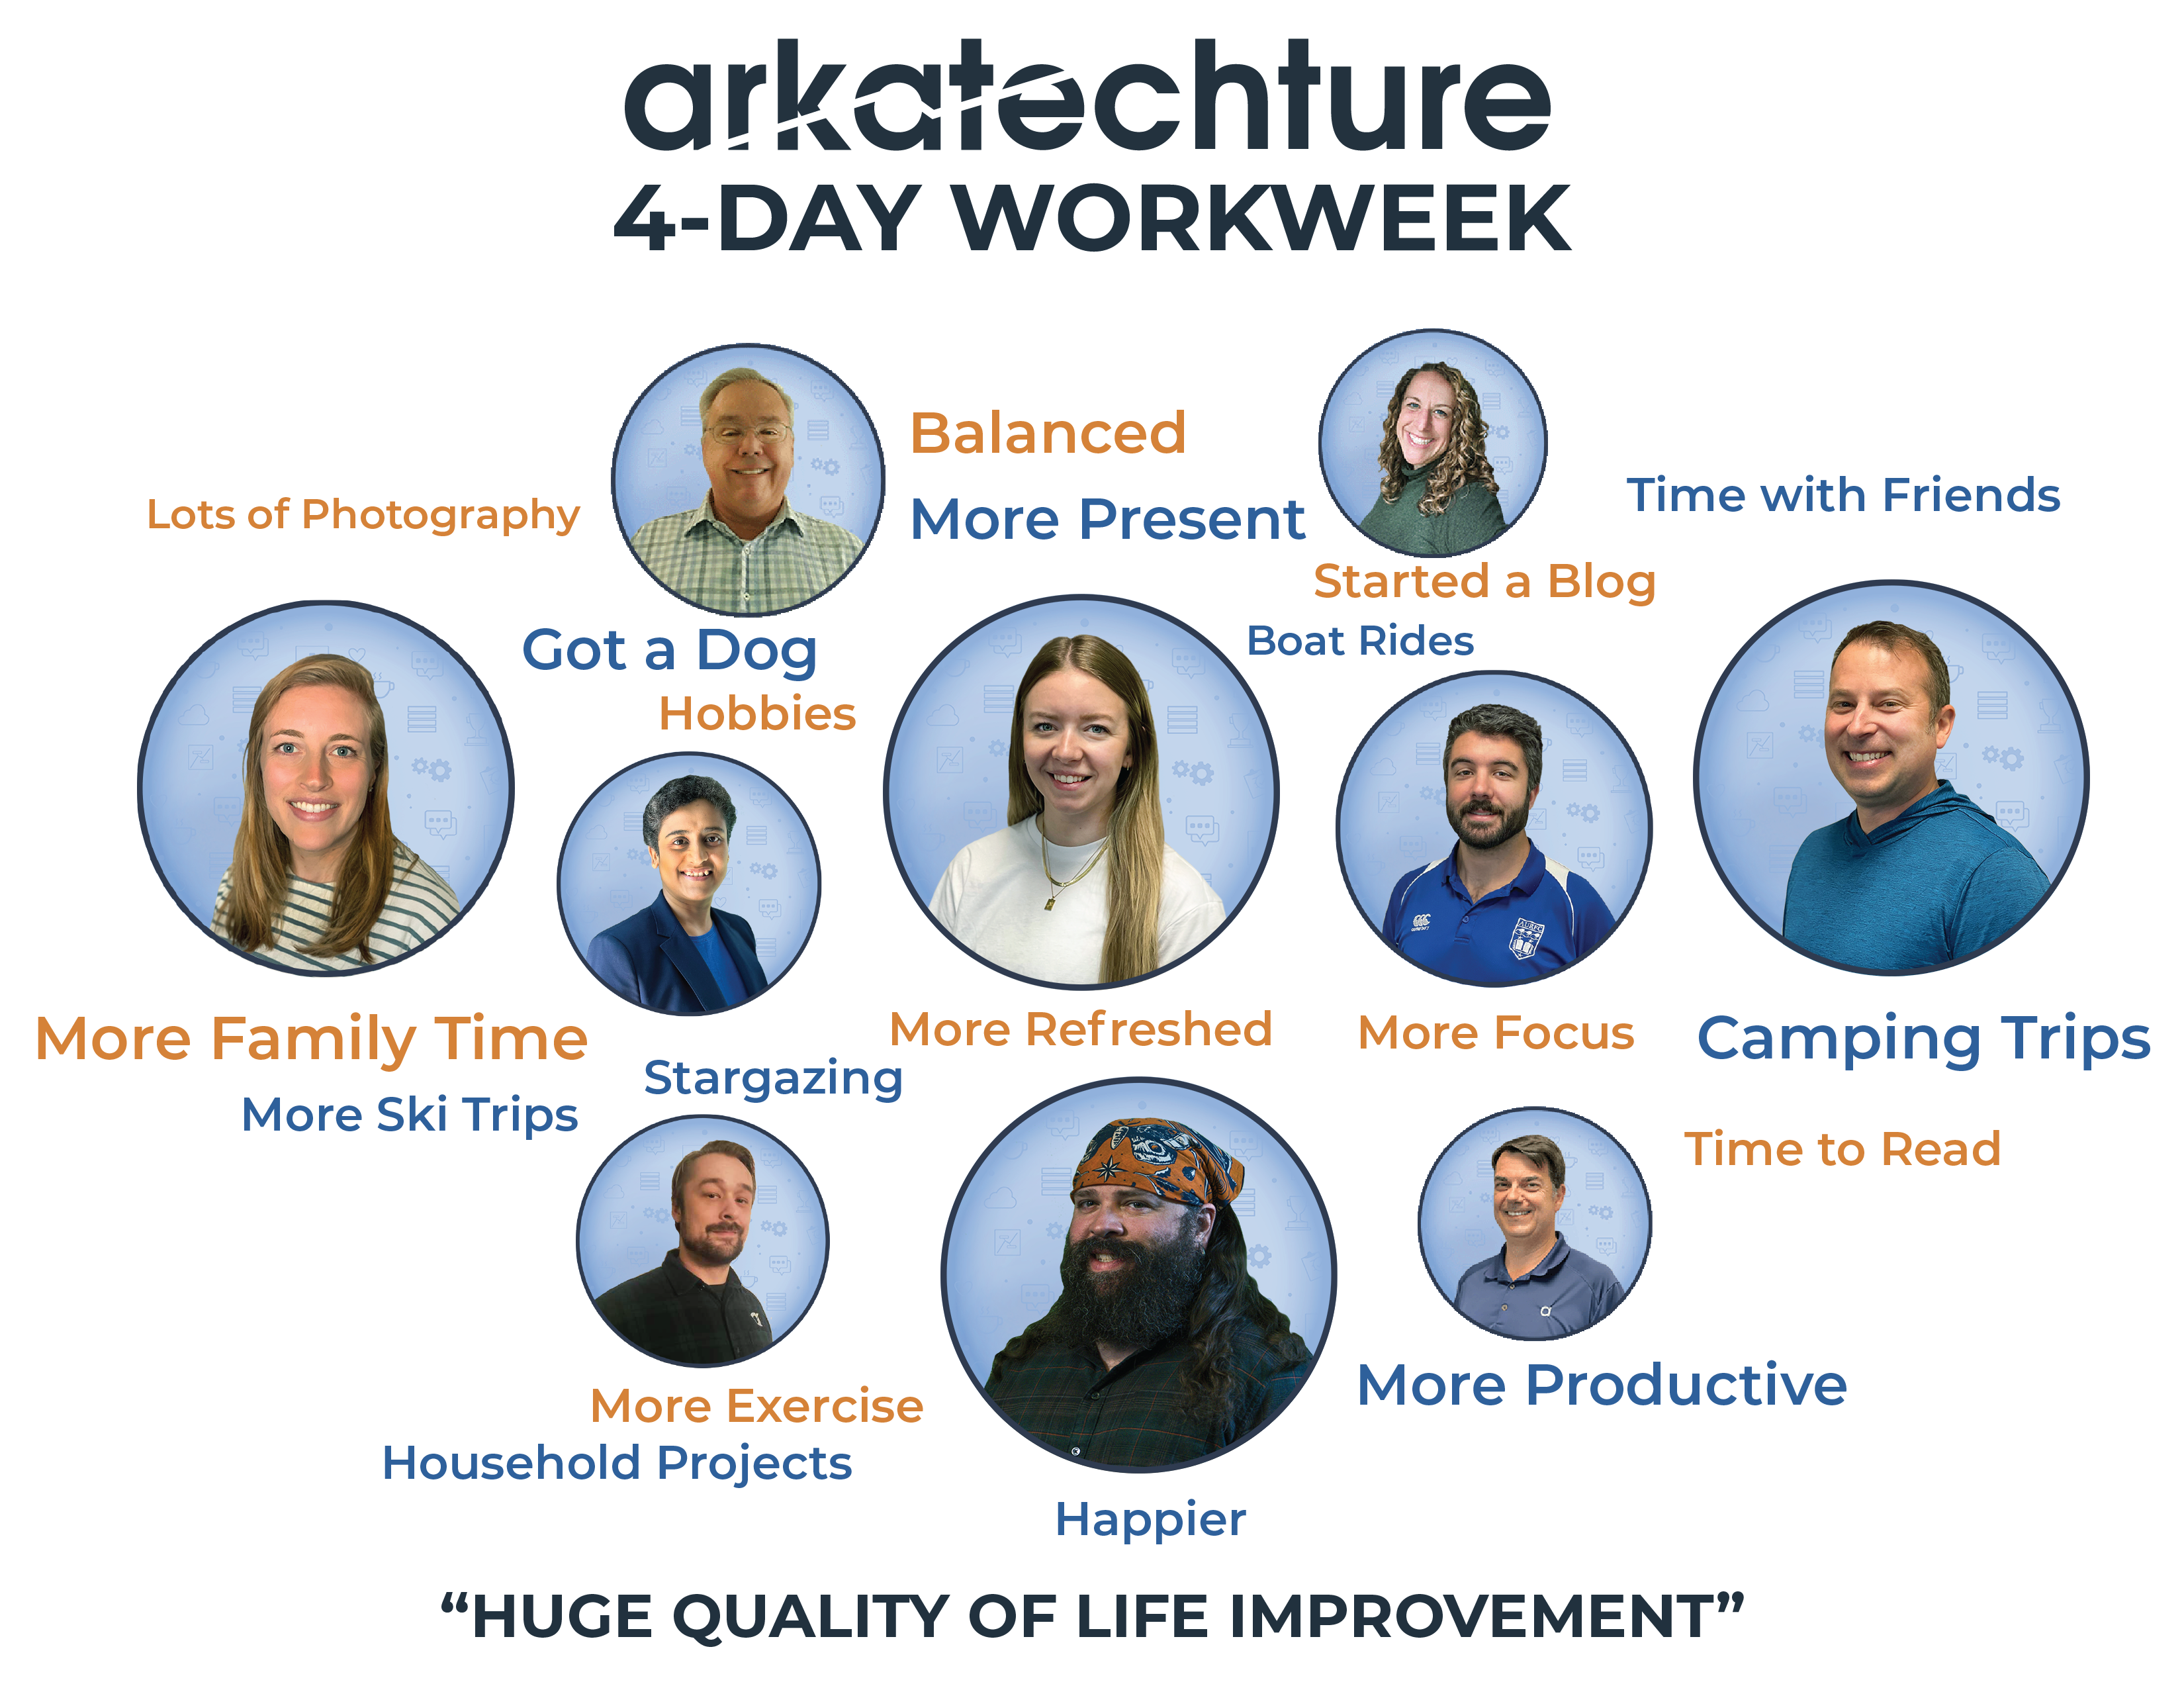 Arkatechture Expands 4-Day Workweek Benefits